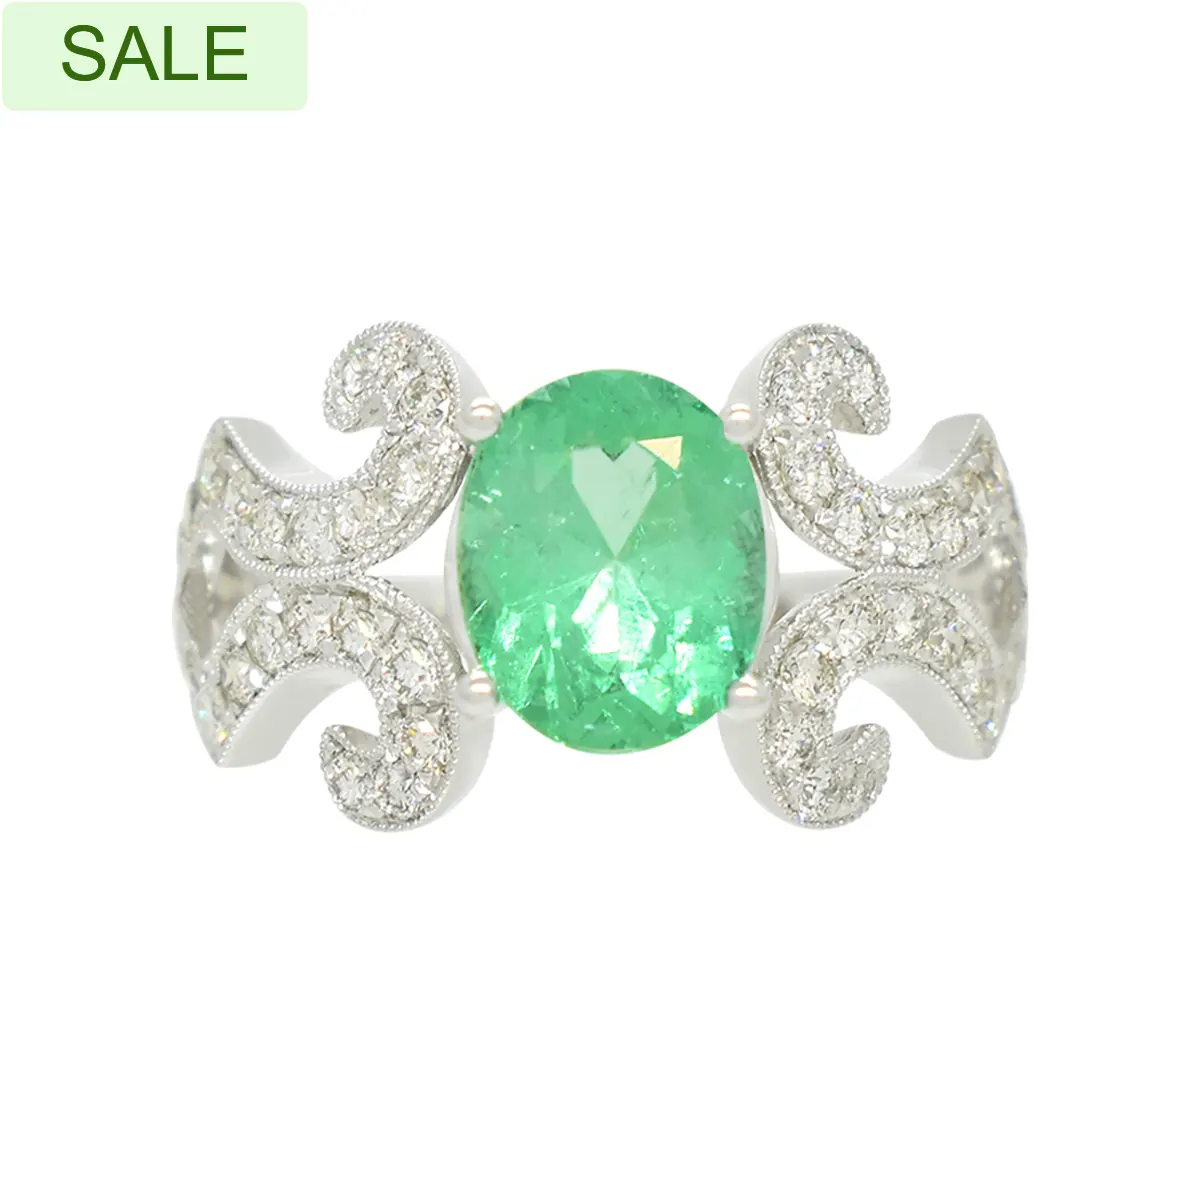 Stunning White Gold Emerald Ring with Oval Shape Genuine Emerald and 44 Round Diamonds